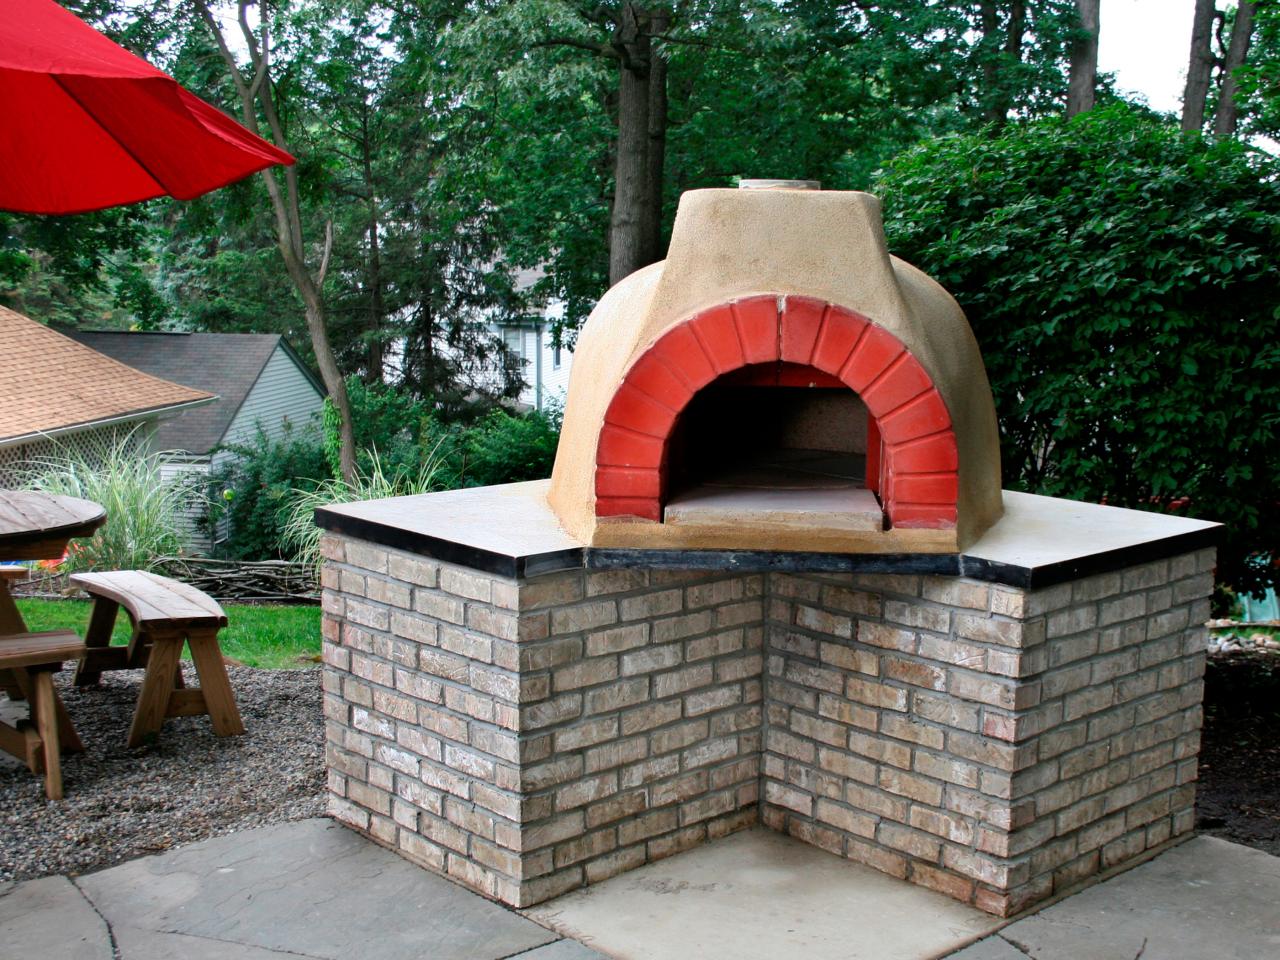 How to Build an Outdoor Pizza Oven | HGTV